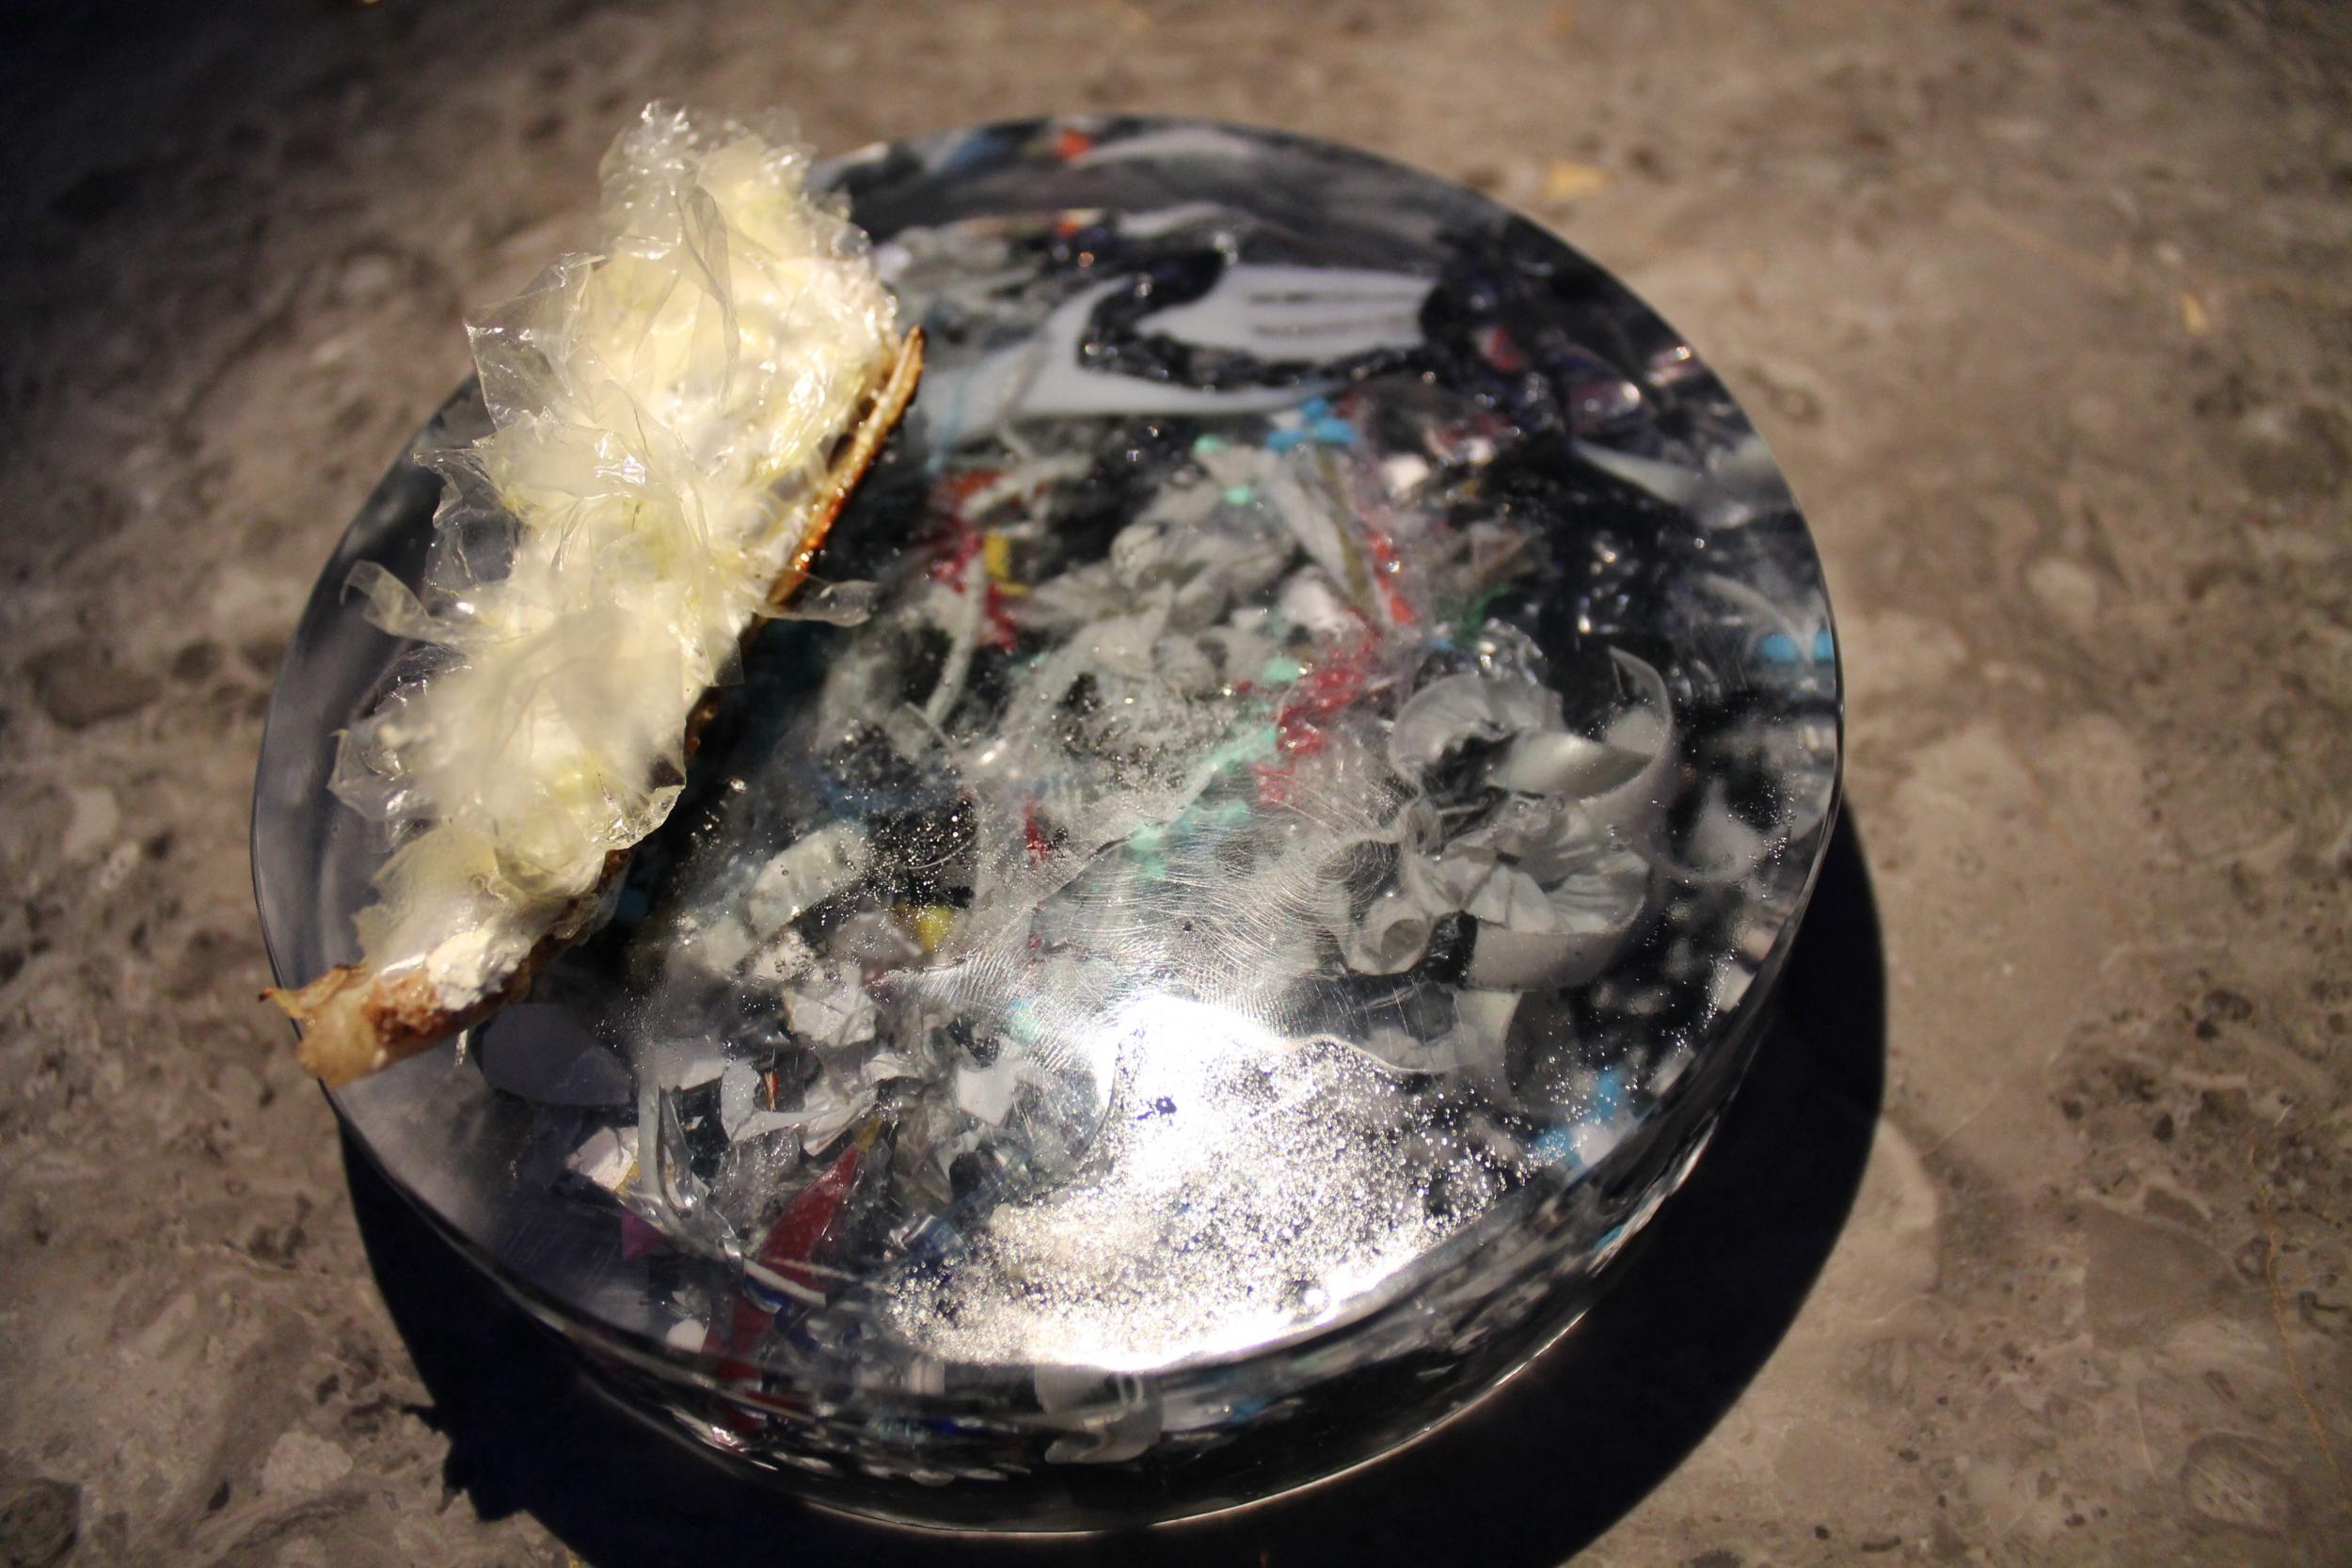 The Plastic Fantastic dish highlights the amount of plastic in the ocean